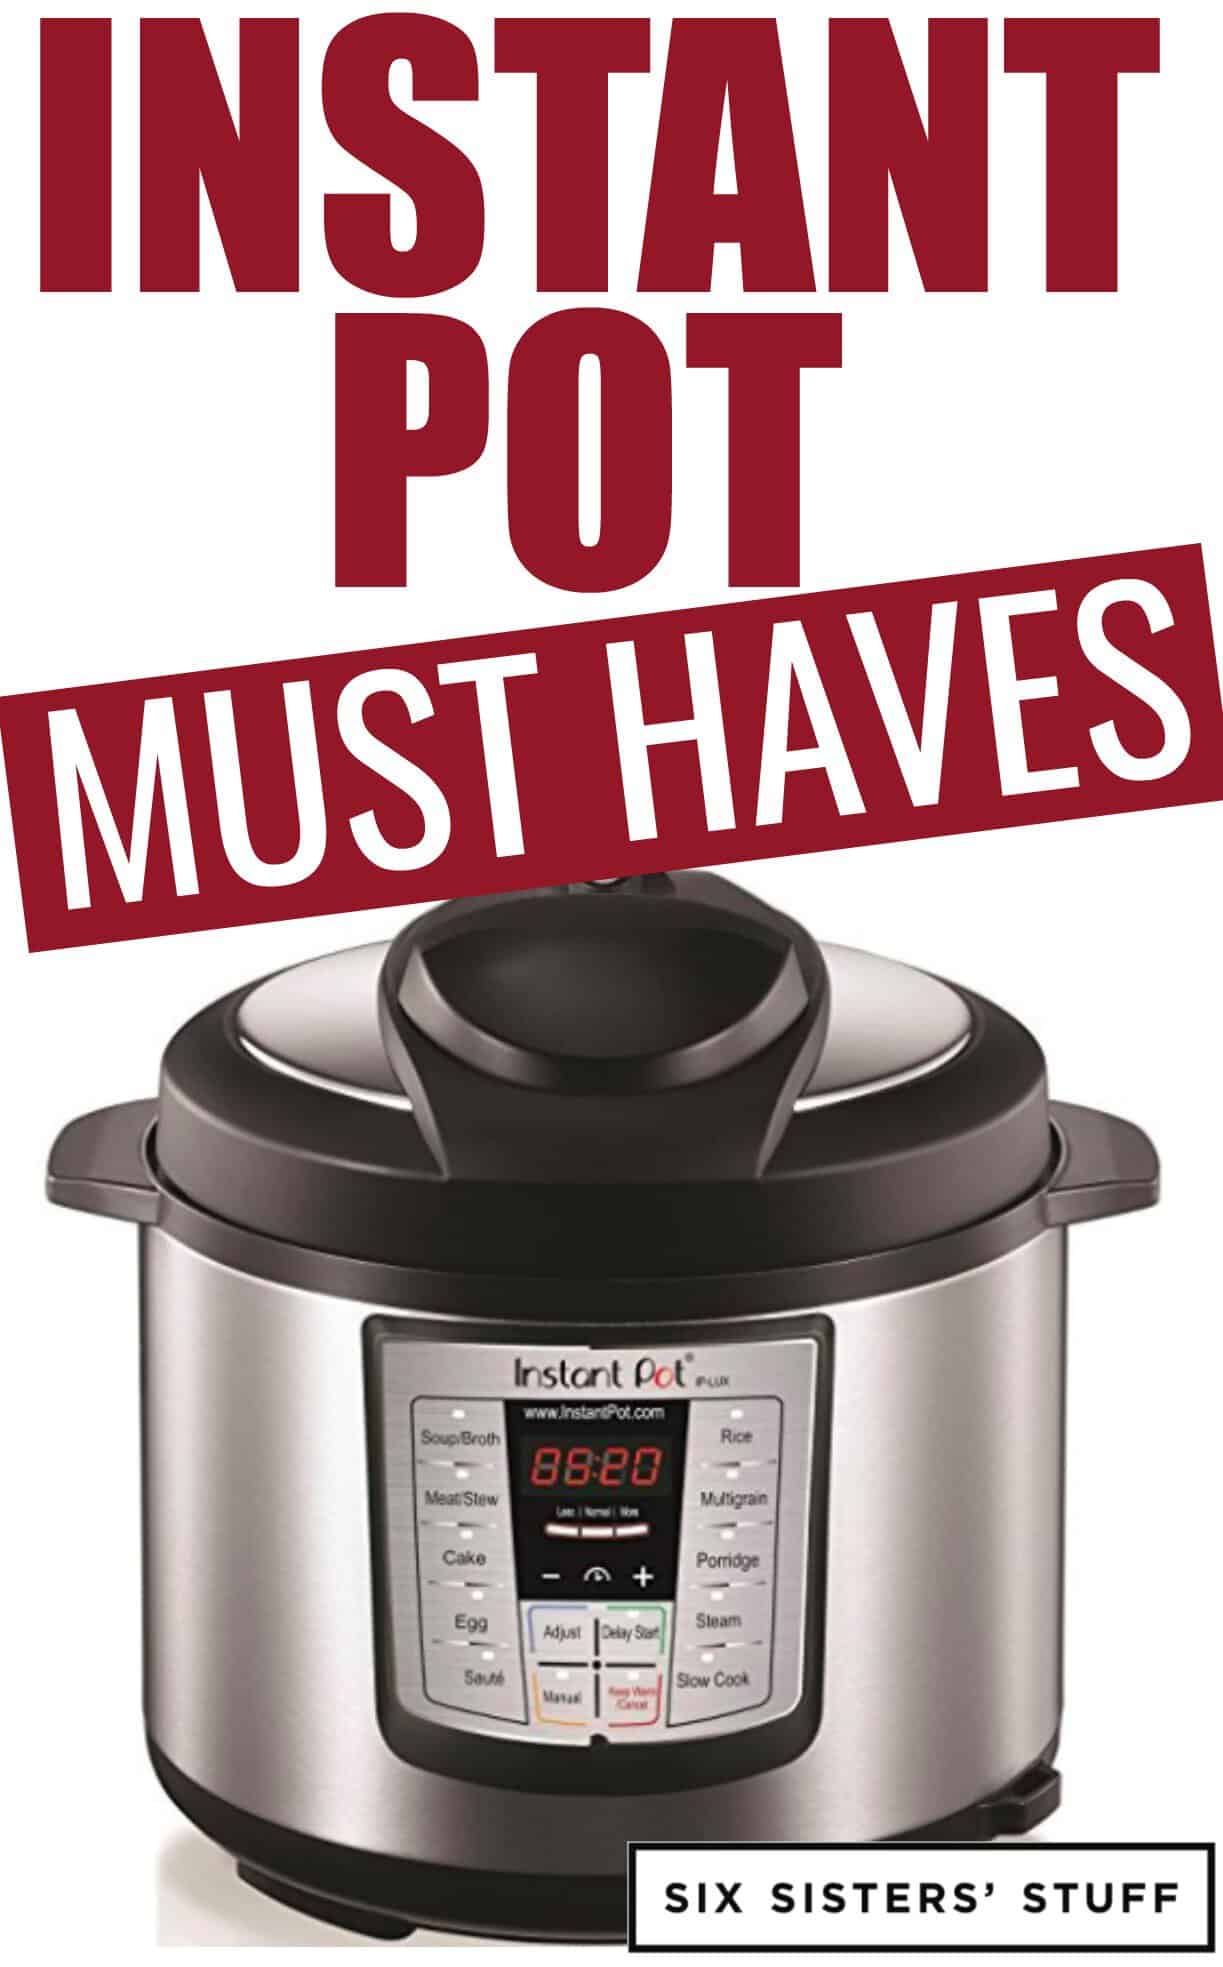 https://www.sixsistersstuff.com/wp-content/uploads/2018/04/INSTANT-POT-MUST-HAVES-PIN.jpg